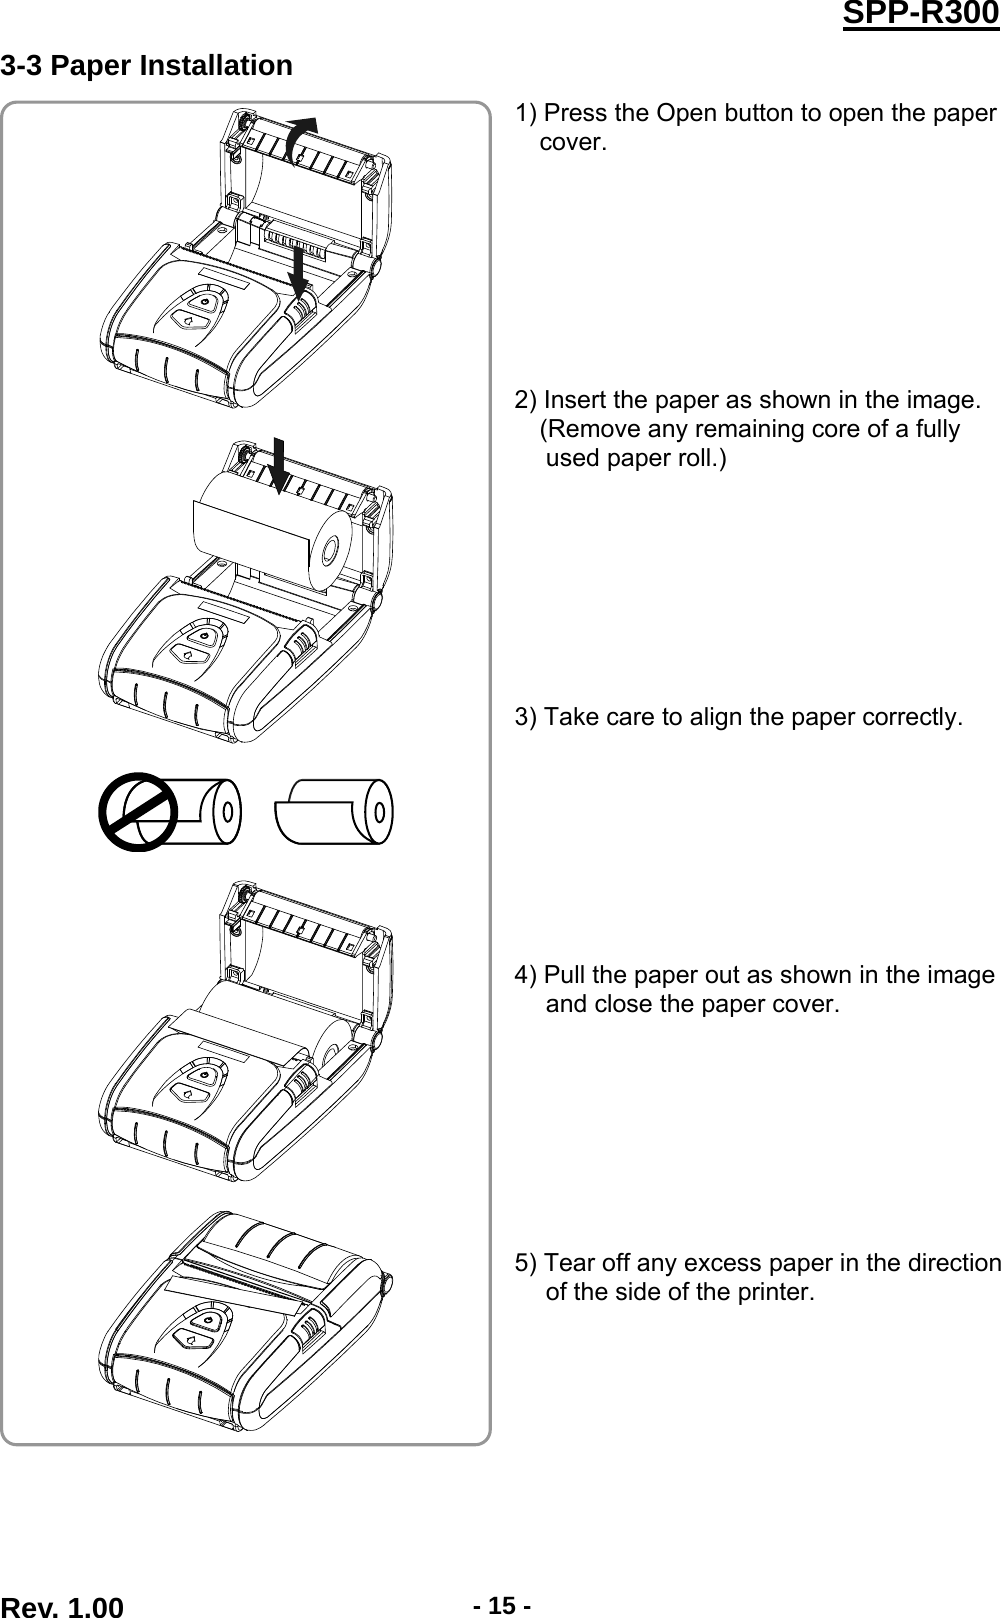  Rev. 1.00  - 15 -SPP-R3003-3 Paper Installation 1) Press the Open button to open the paper cover.         2) Insert the paper as shown in the image. (Remove any remaining core of a fully used paper roll.)         3) Take care to align the paper correctly.         4) Pull the paper out as shown in the image and close the paper cover.         5) Tear off any excess paper in the direction of the side of the printer.          